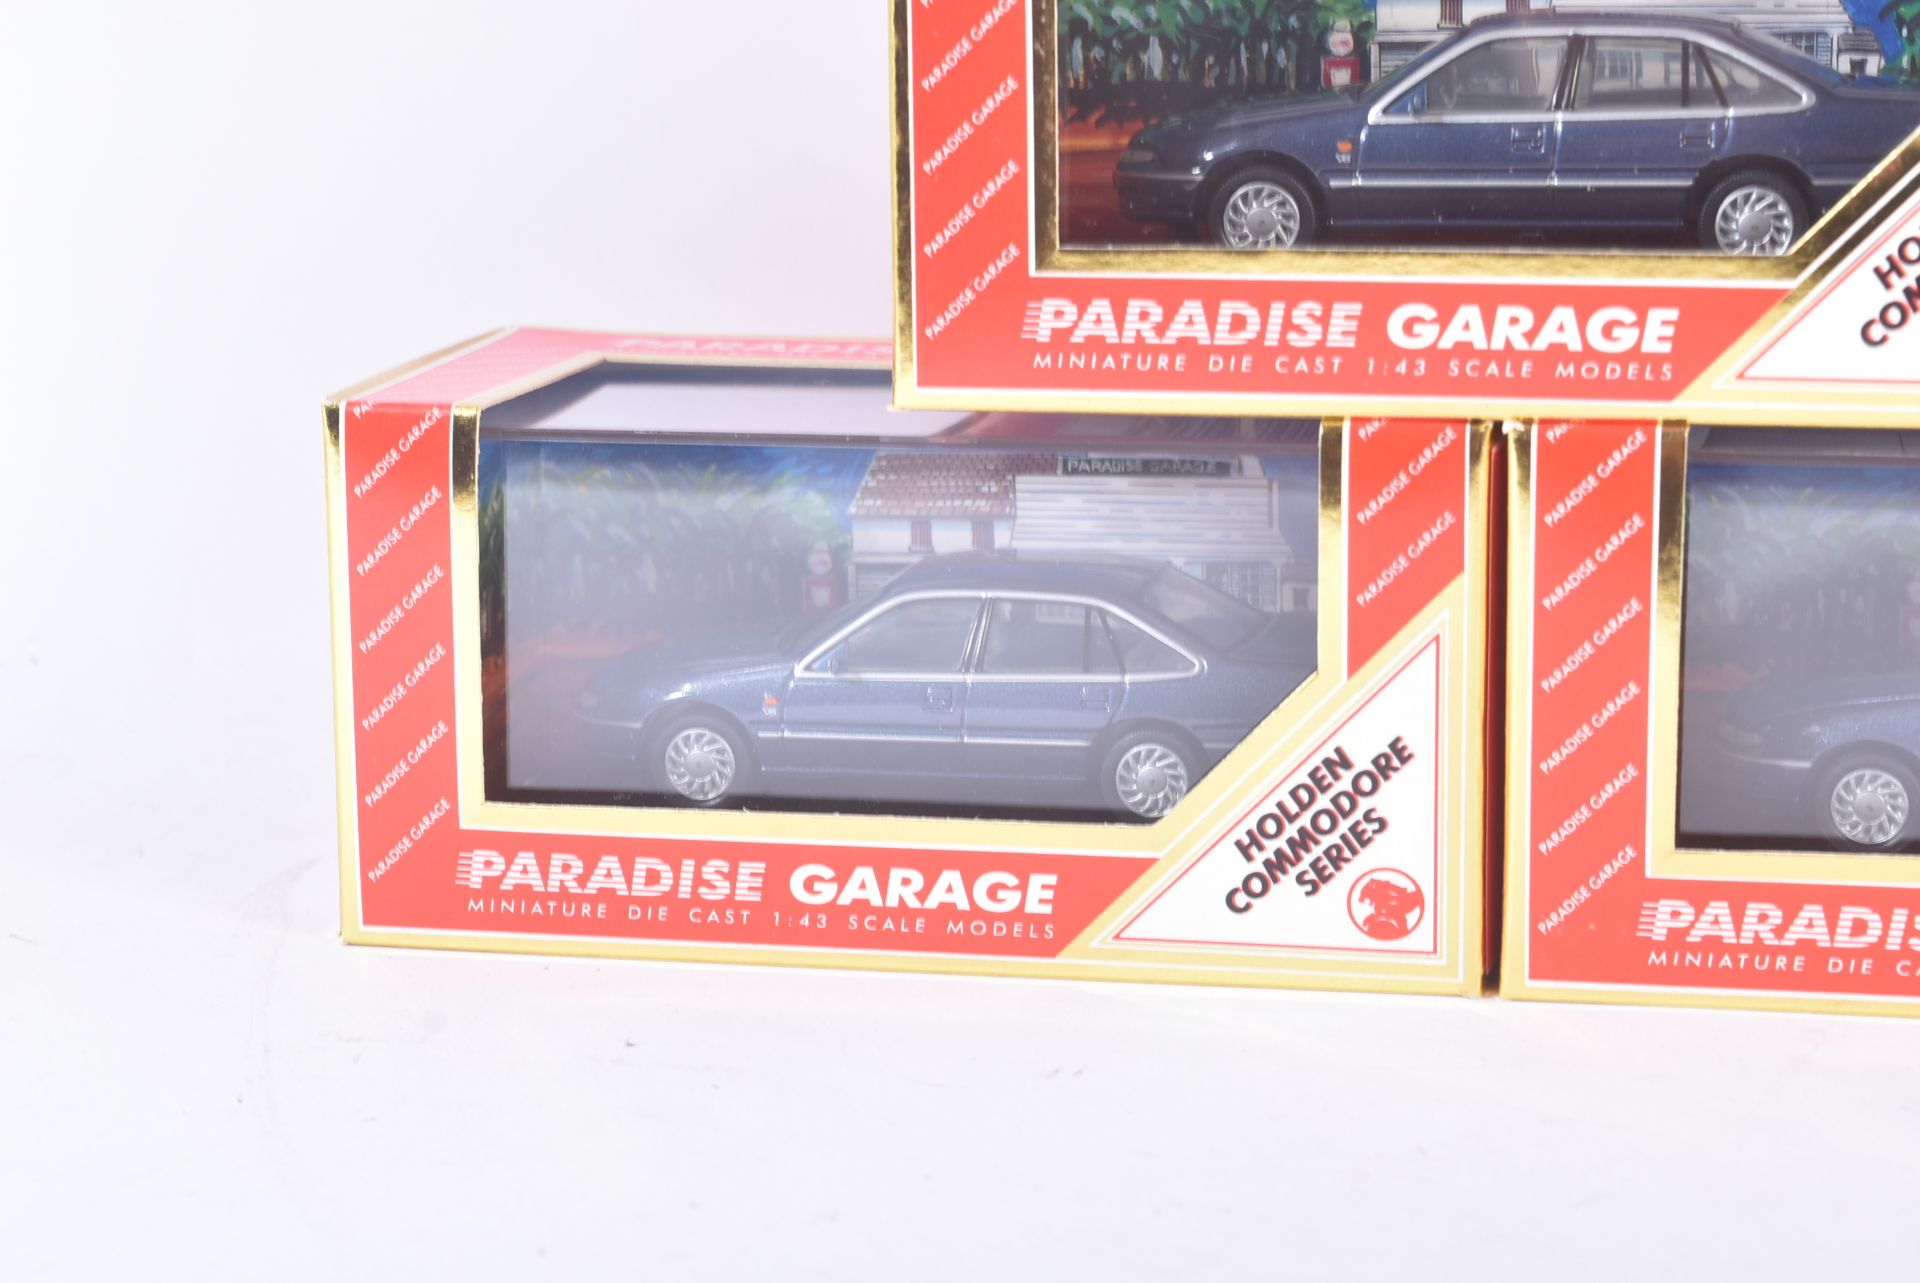 PARADISE GARAGE - 1/43 SCALE PRECISION DIECAST MODELS - Image 4 of 5